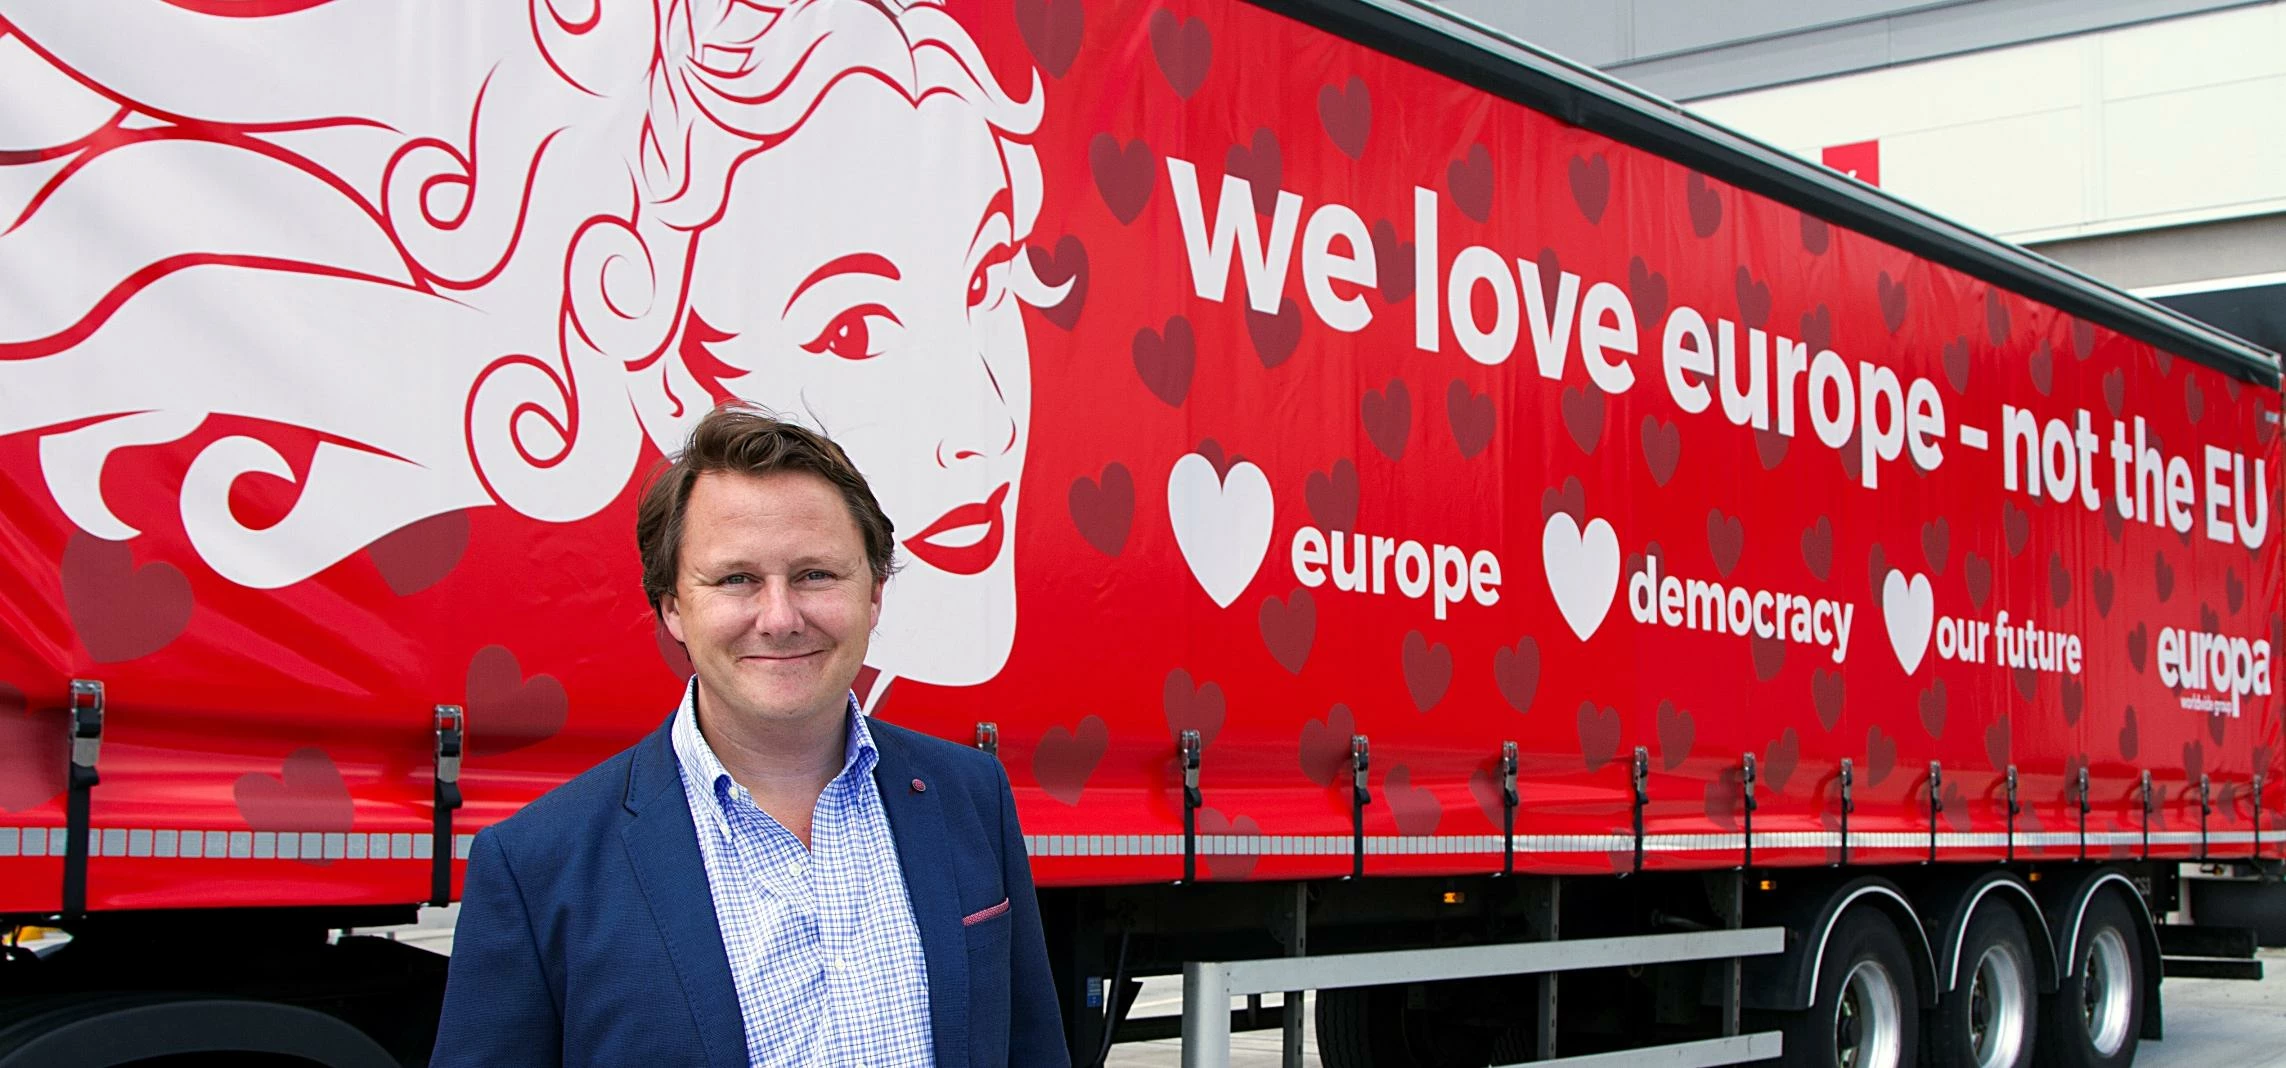 Andrew Baxter from Europa Worldwide unveils his new truck to mark EU Referendum result  